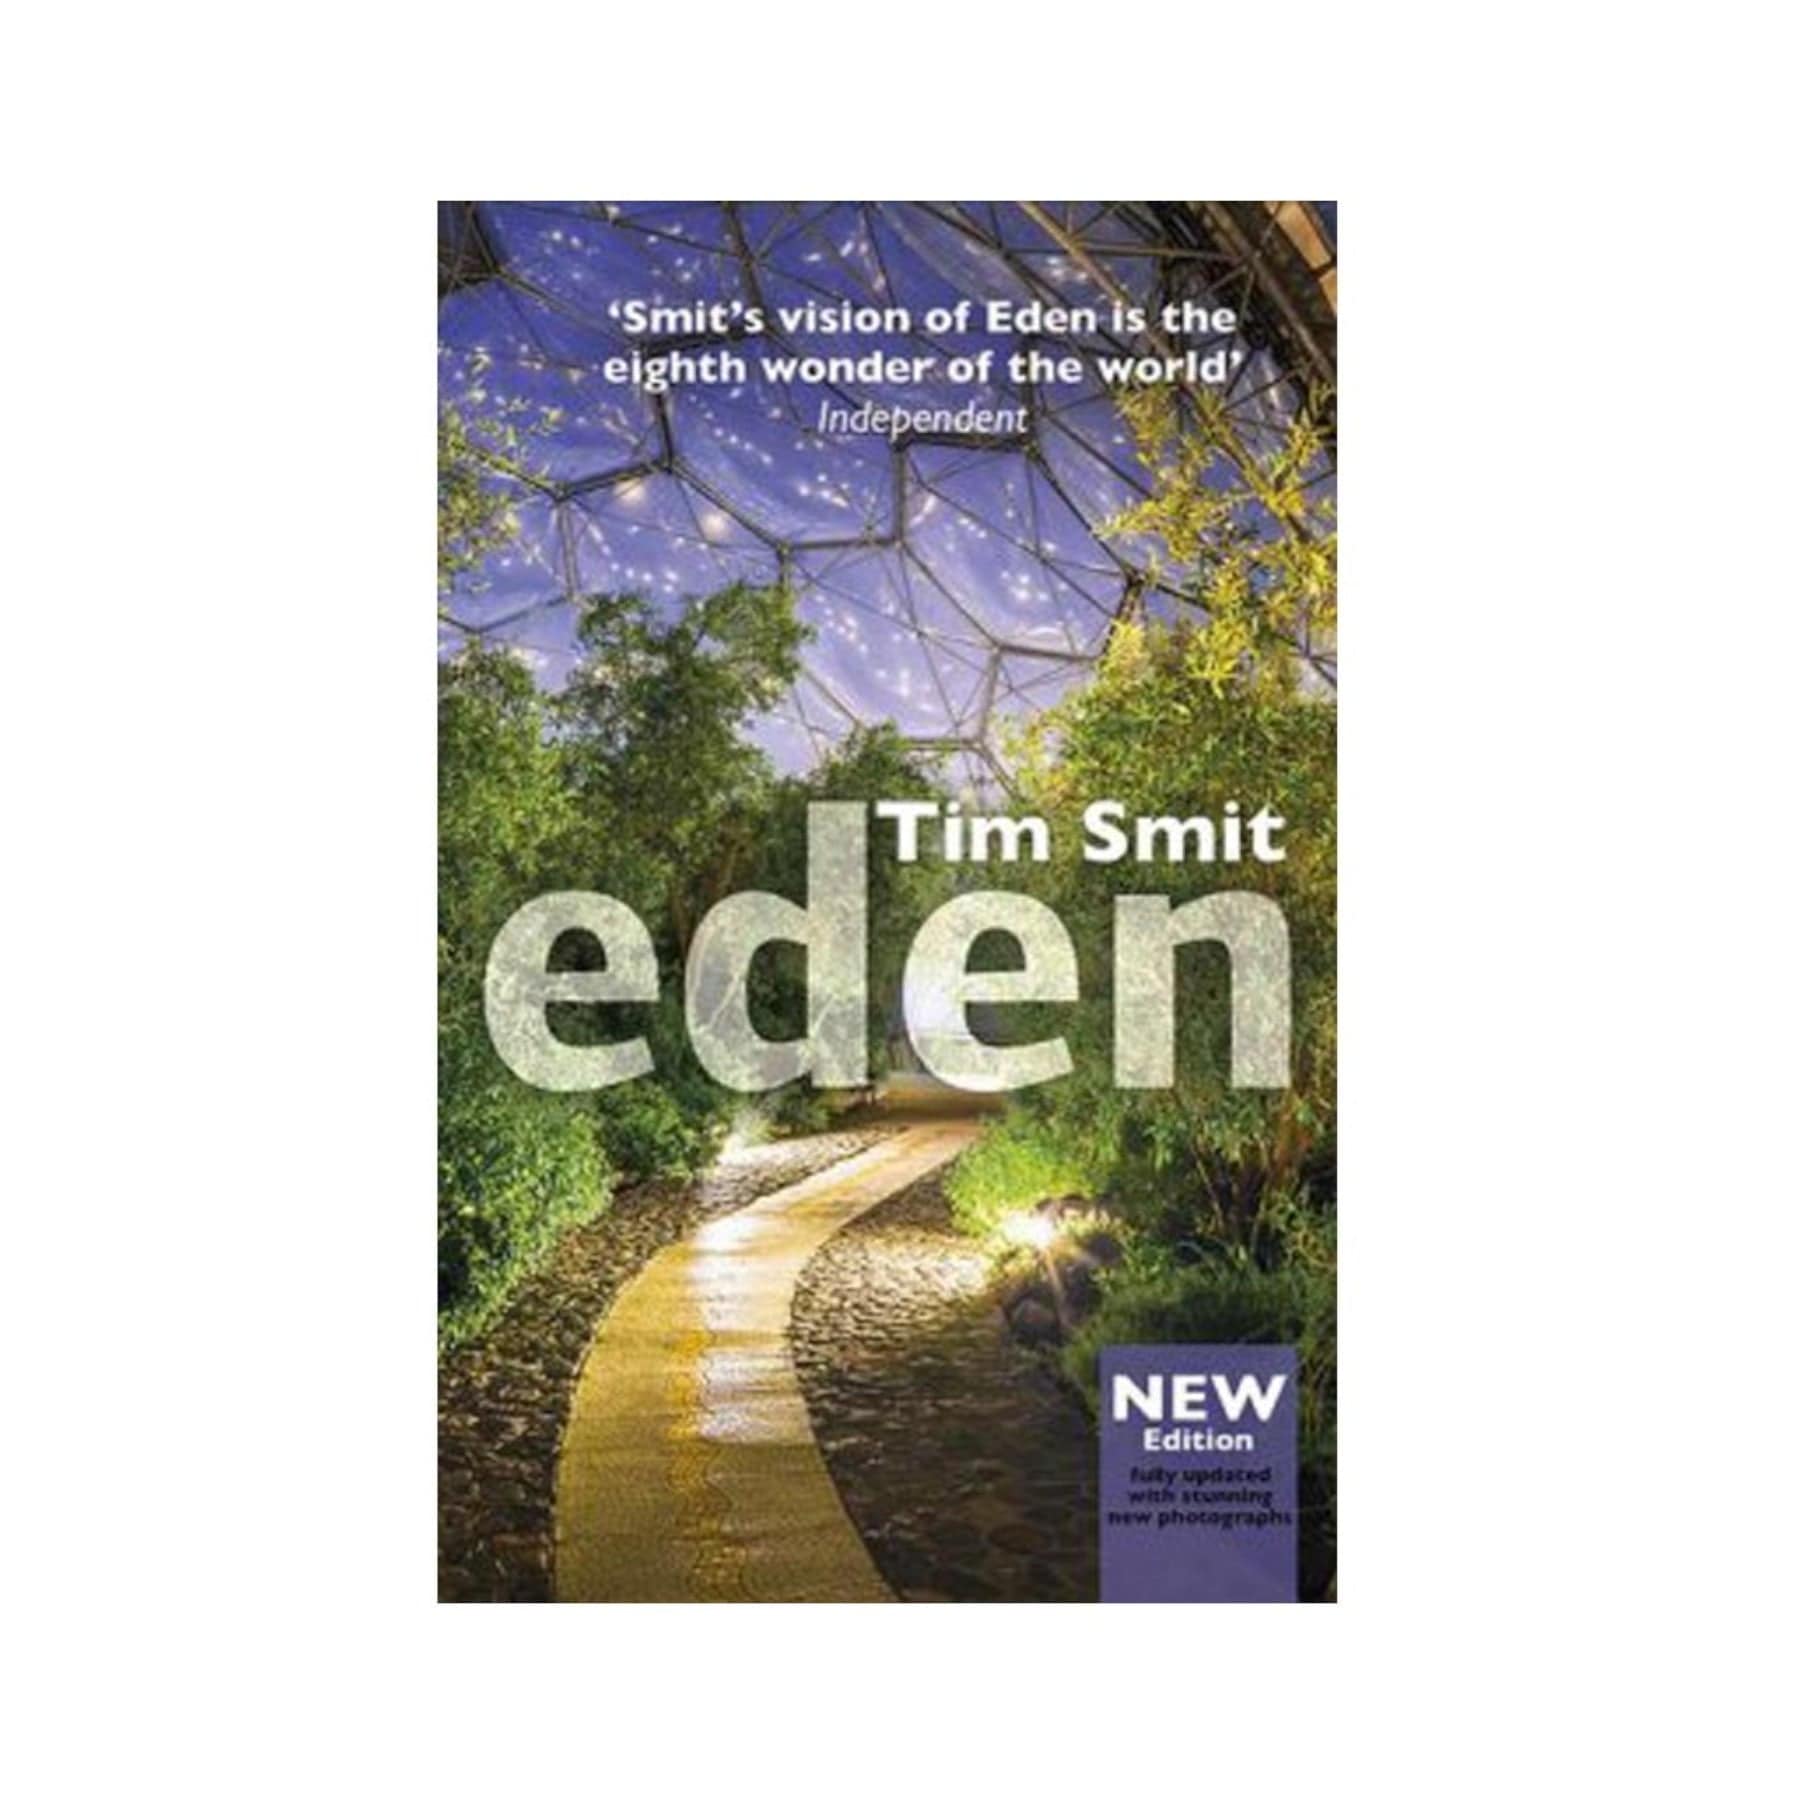 Book cover featuring 'Eden' by Tim Smit with a quote from the Independent, depicting a lush garden pathway under a geodesic dome, representing an ecological paradise, with text indicating a new, fully updated edition with new photographs.